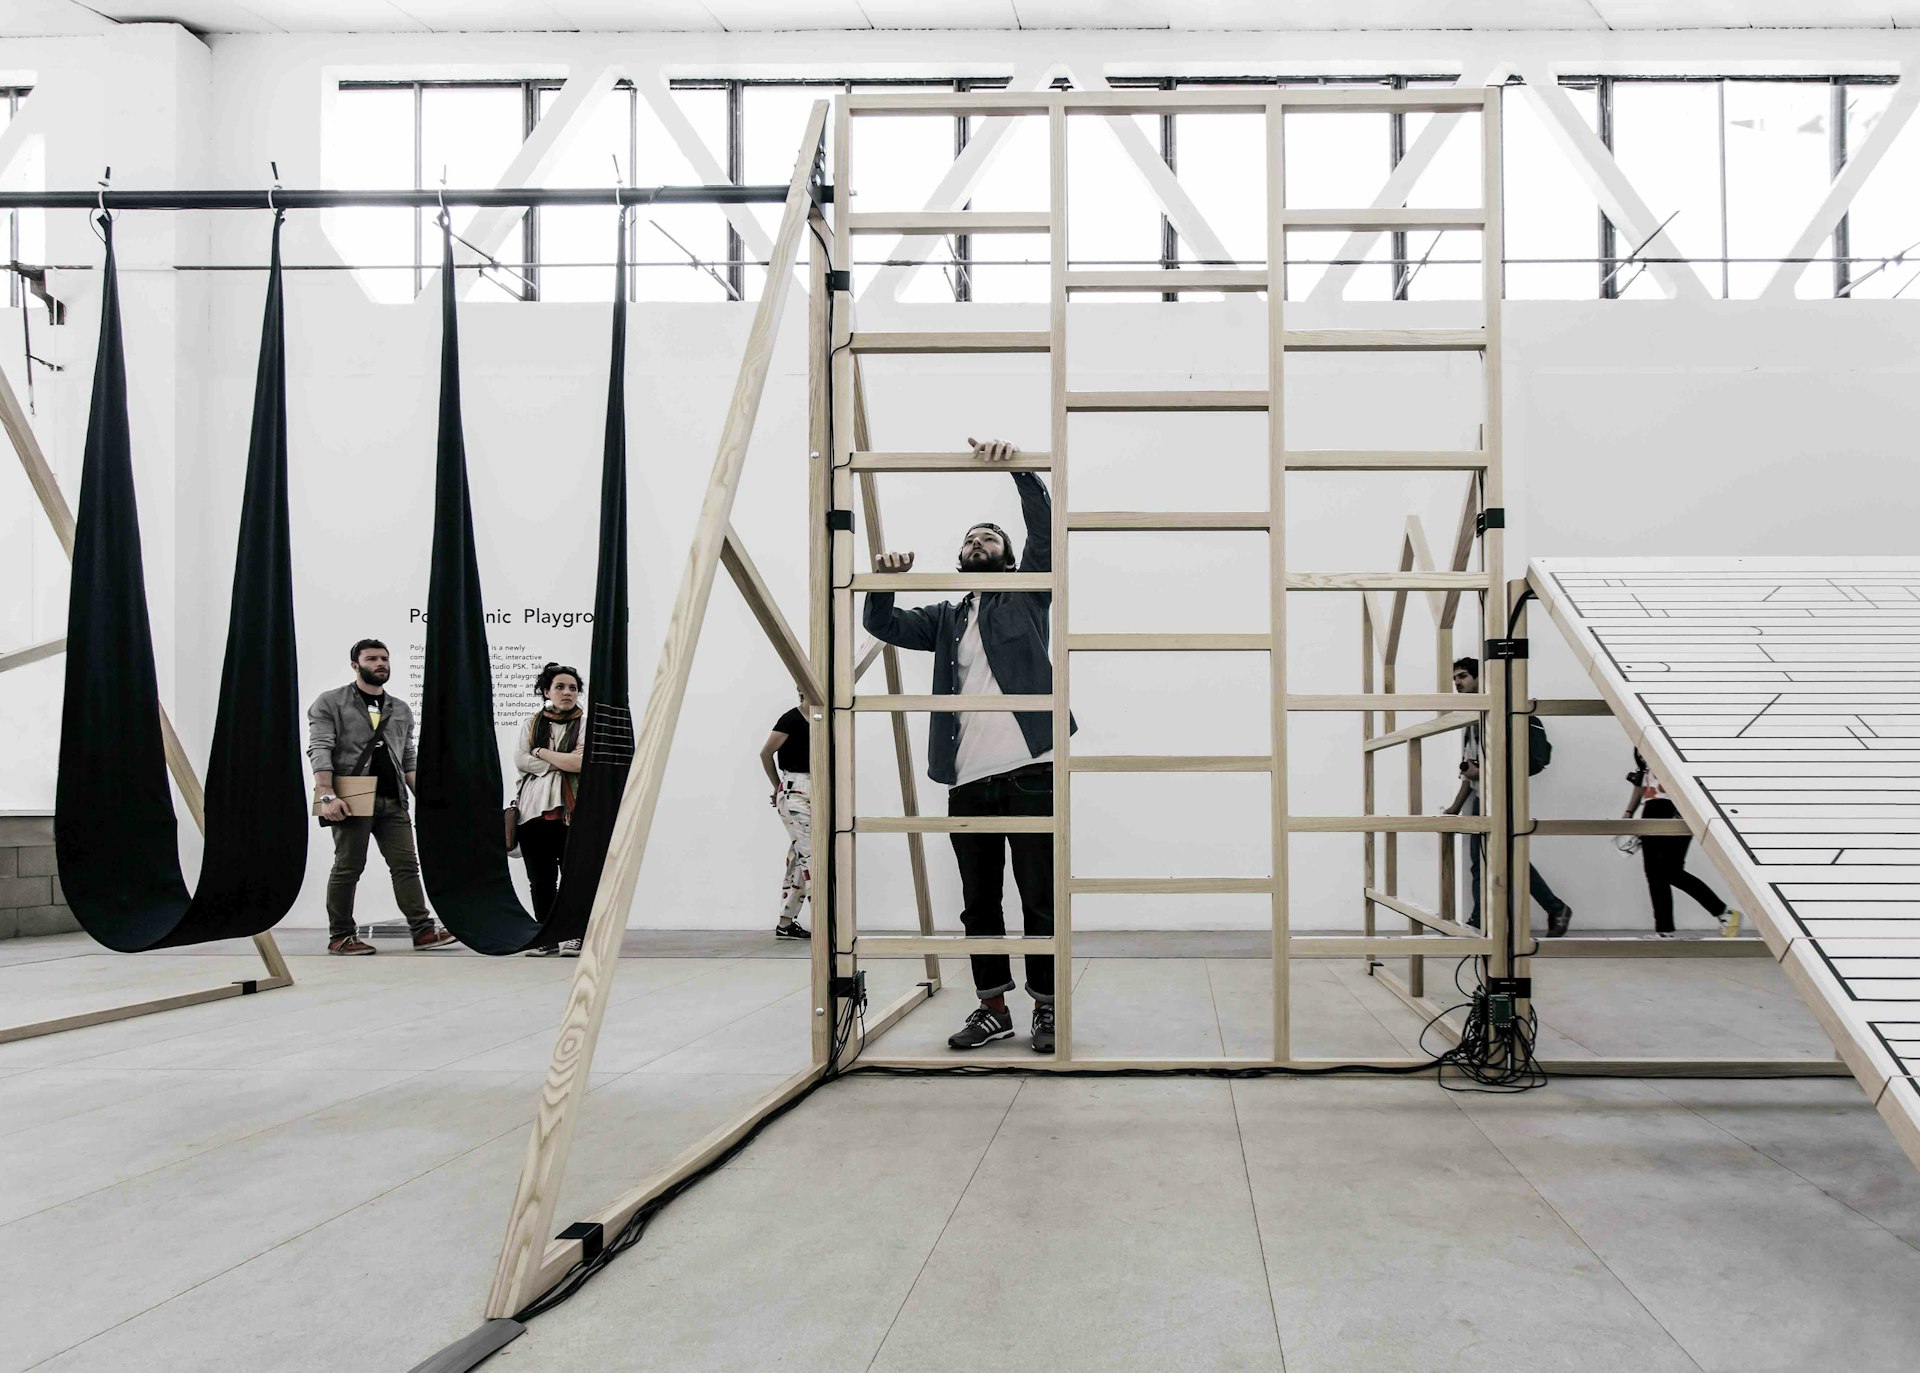 Polyphonic Playground turns messing about into a giant musical instrument